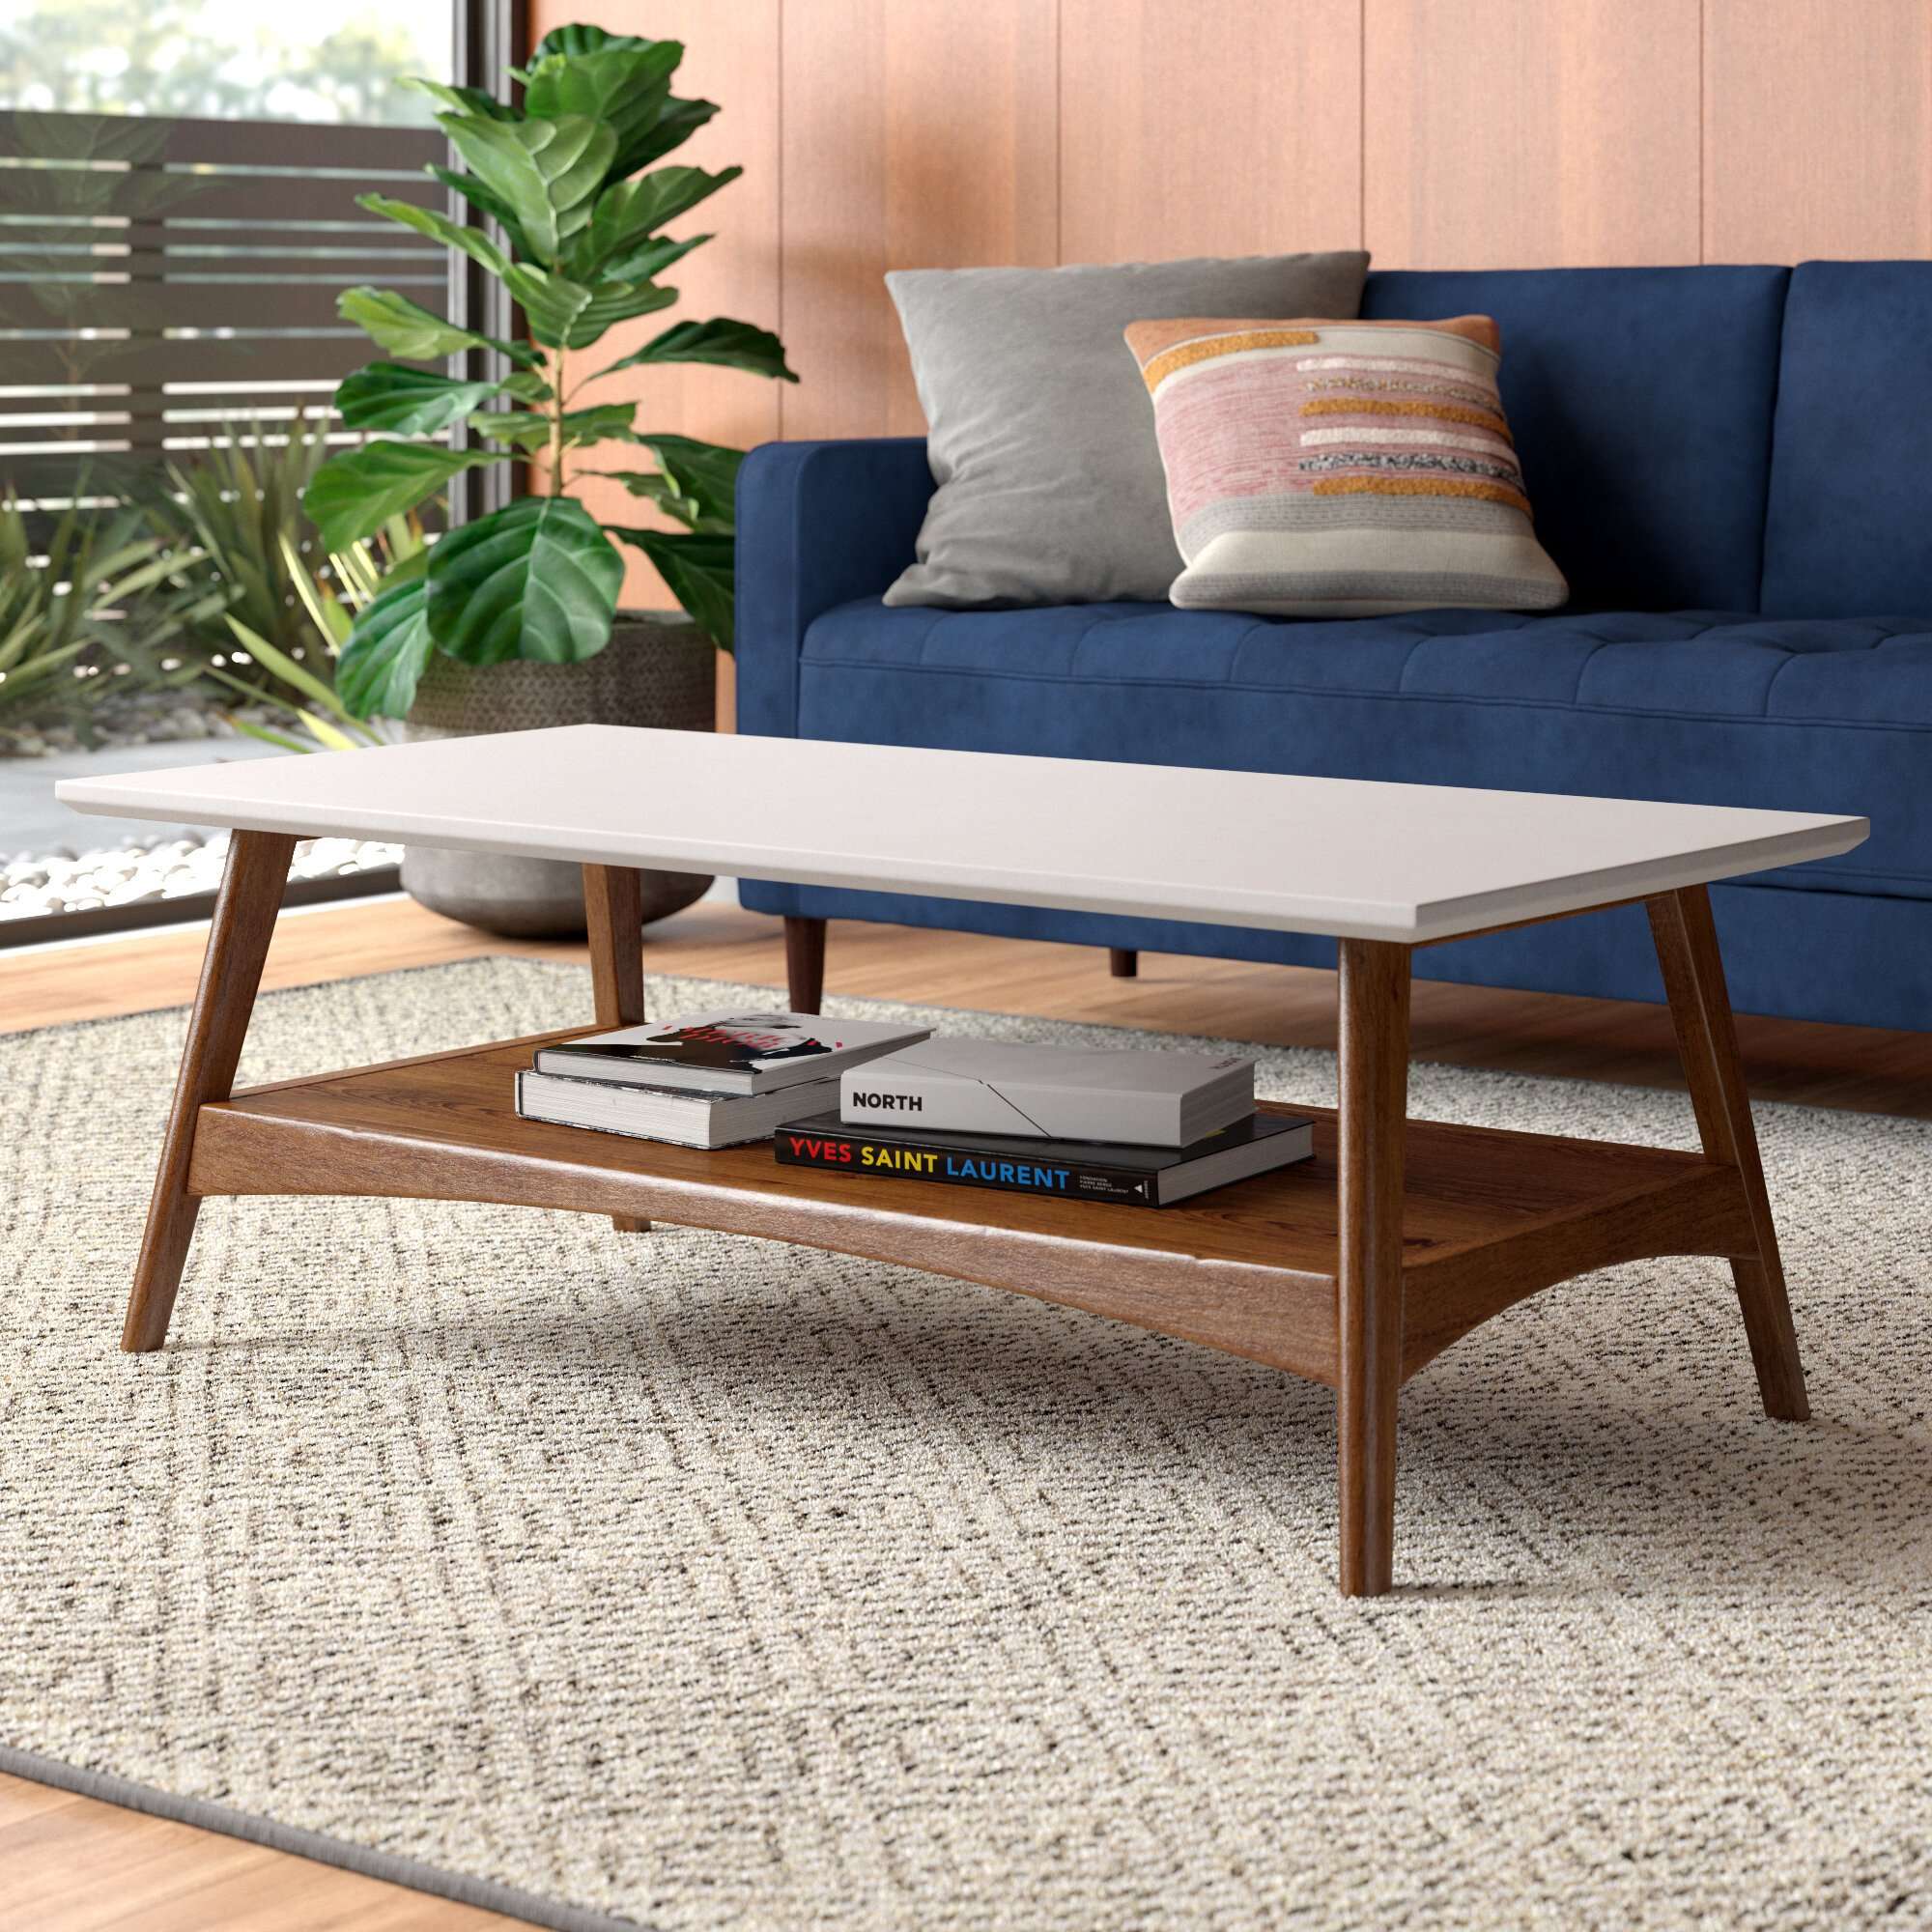 What Is the Average Size of a Coffee Table?